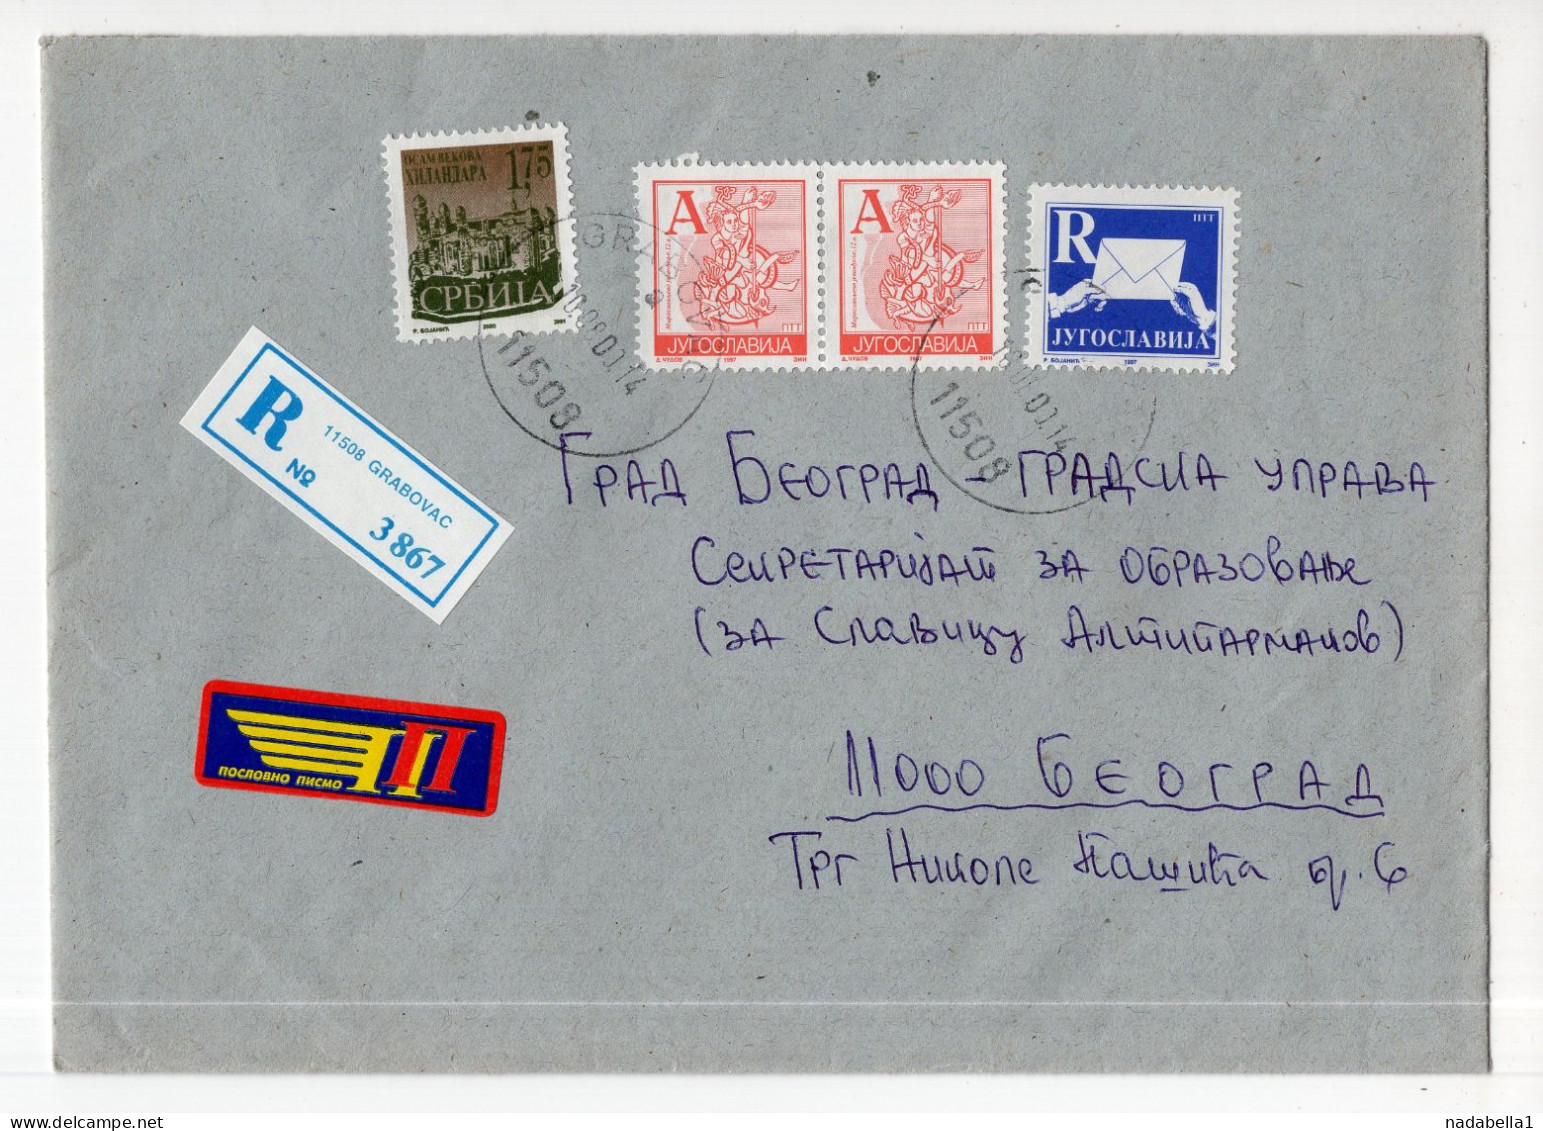 2000. YUGOSLAVIA,SERBIA,GRABOVAC RECORDED COVER USED TO BELGRADE,8 CENTURIES OF HILANDAR MONASTERY STAMP - Lettres & Documents